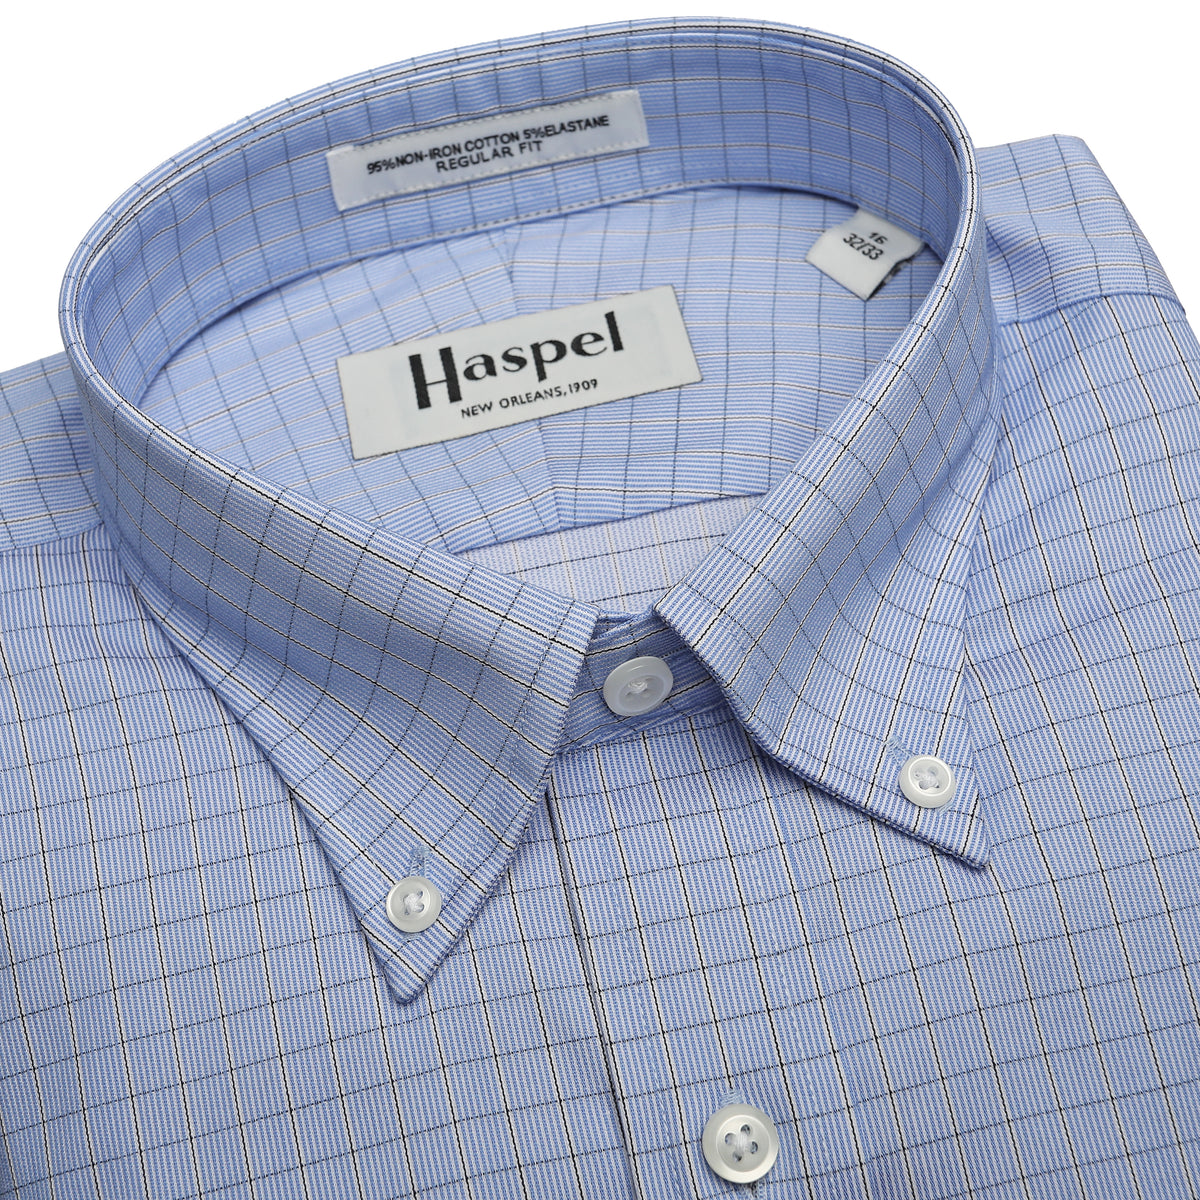 No hassle, only Haspel means no wasting time on multiple websites to complete your look. You can find all the classic men&#39;s dress shirts here that were carefully chosen to pair up with our unique, lightweight men&#39;s suits.  100% Imported Combed Cotton • 80&#39;s 2-Ply/Non-Iron Pinpoint Fabric • Button Down Collar • Long Sleeve, Button Cuff